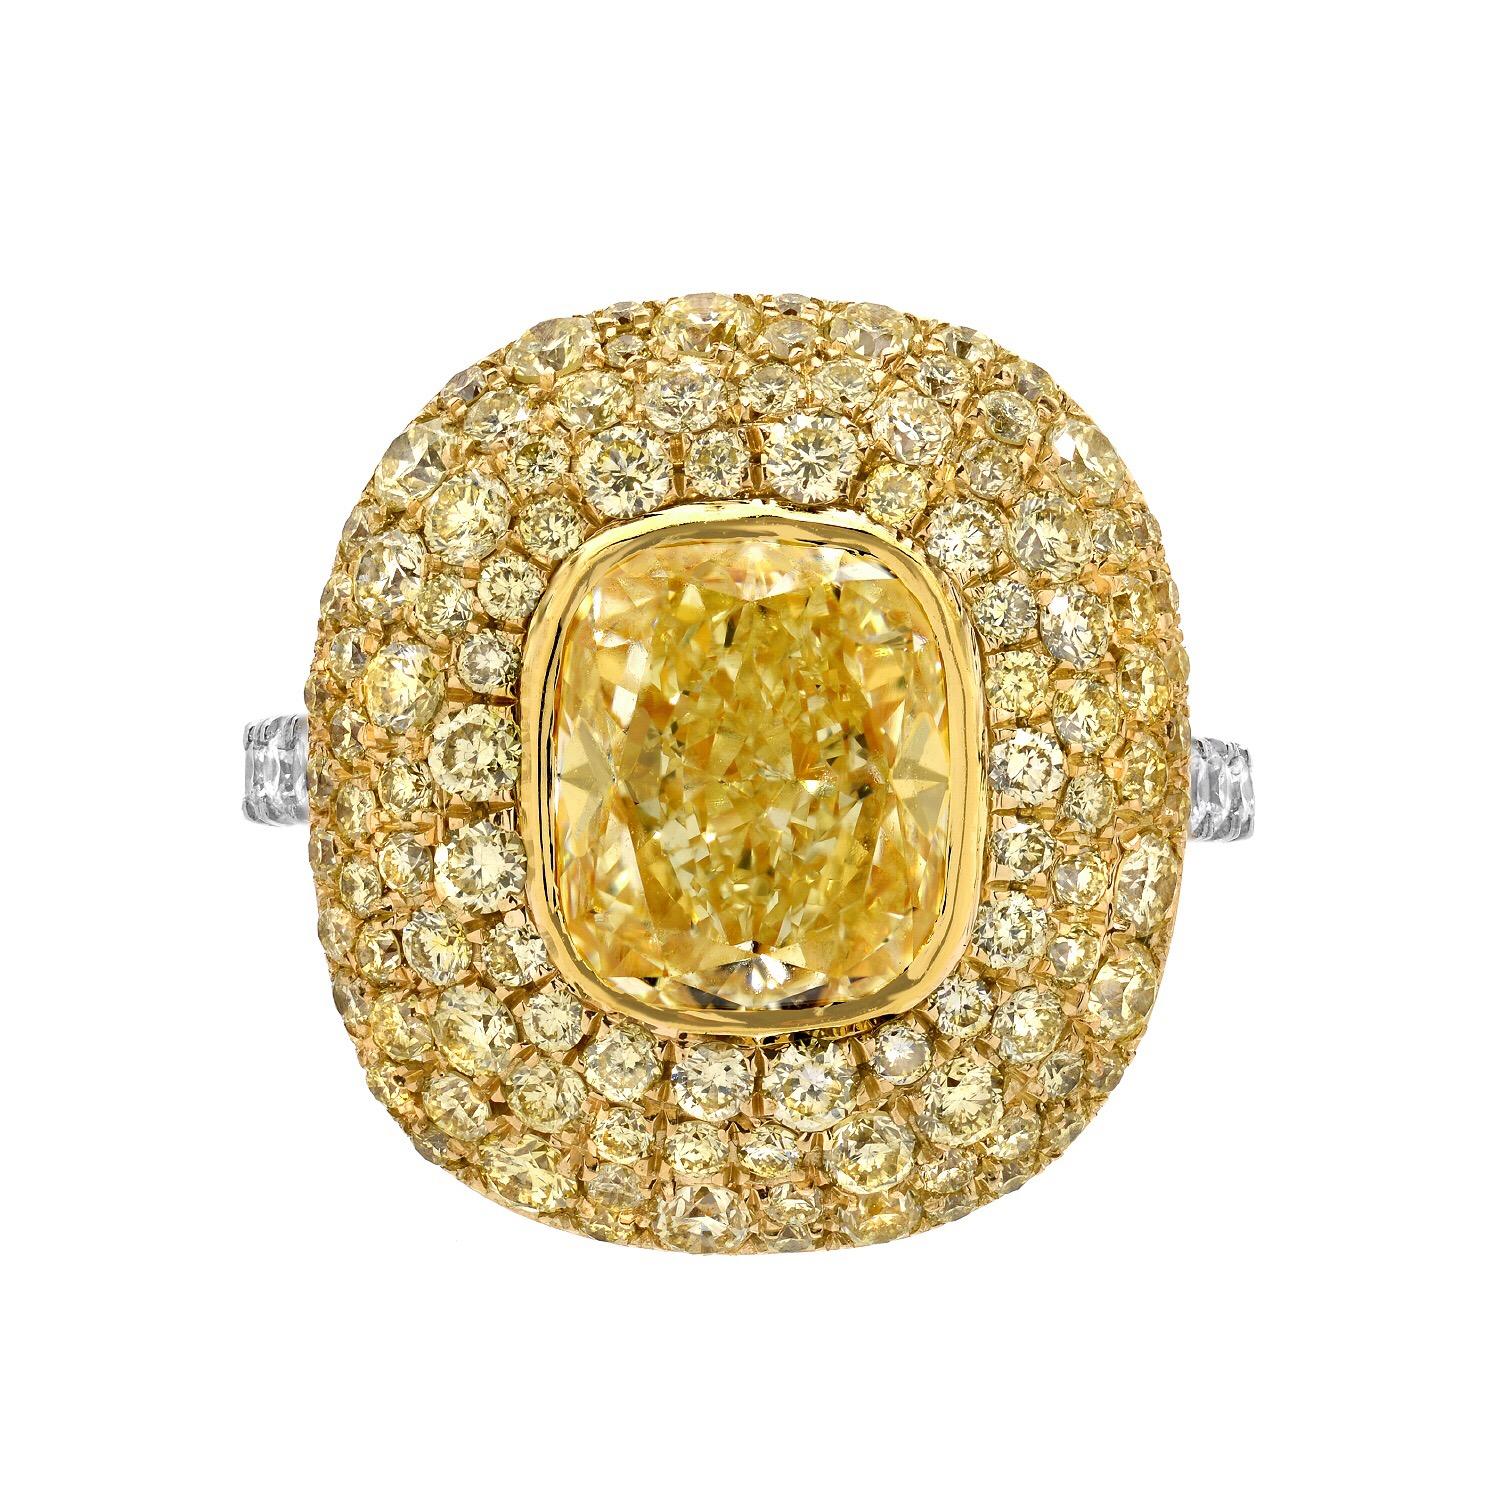 Contemporary Fancy Light Yellow Diamond Ring 3.01 Carat Cushion Cut GIA Certified For Sale